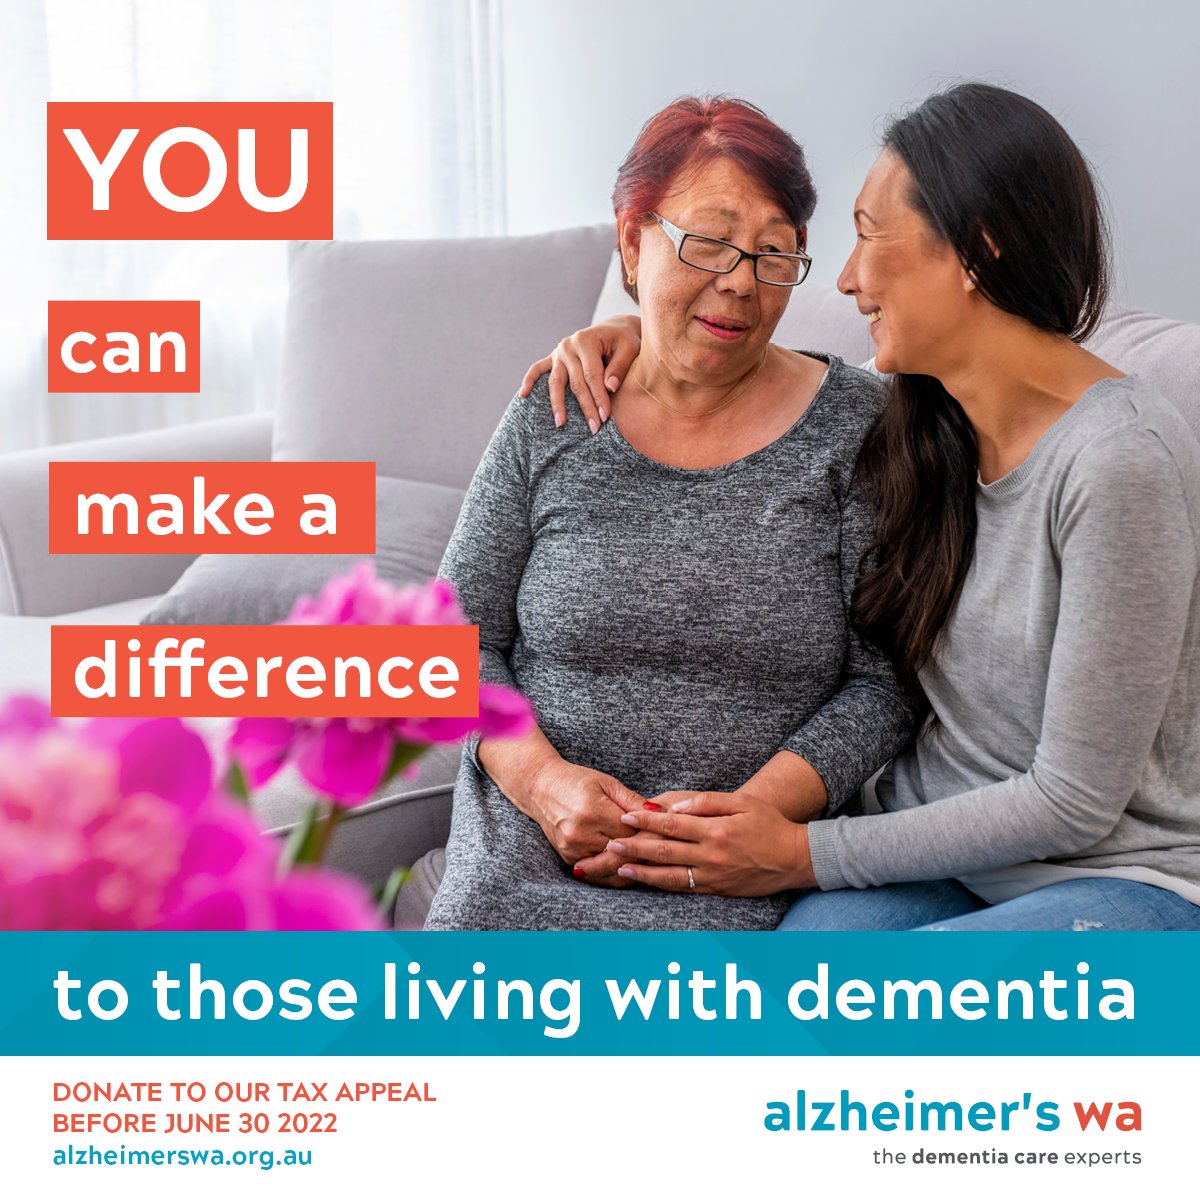 As the financial year draws to a close, we ask for your support as we provide dementia care services statewide. These include home care packages, support worker training, maintaining our day respite facilities, and post-diagnostic support. 👐Donate here: bit.ly/3xHfG1a.